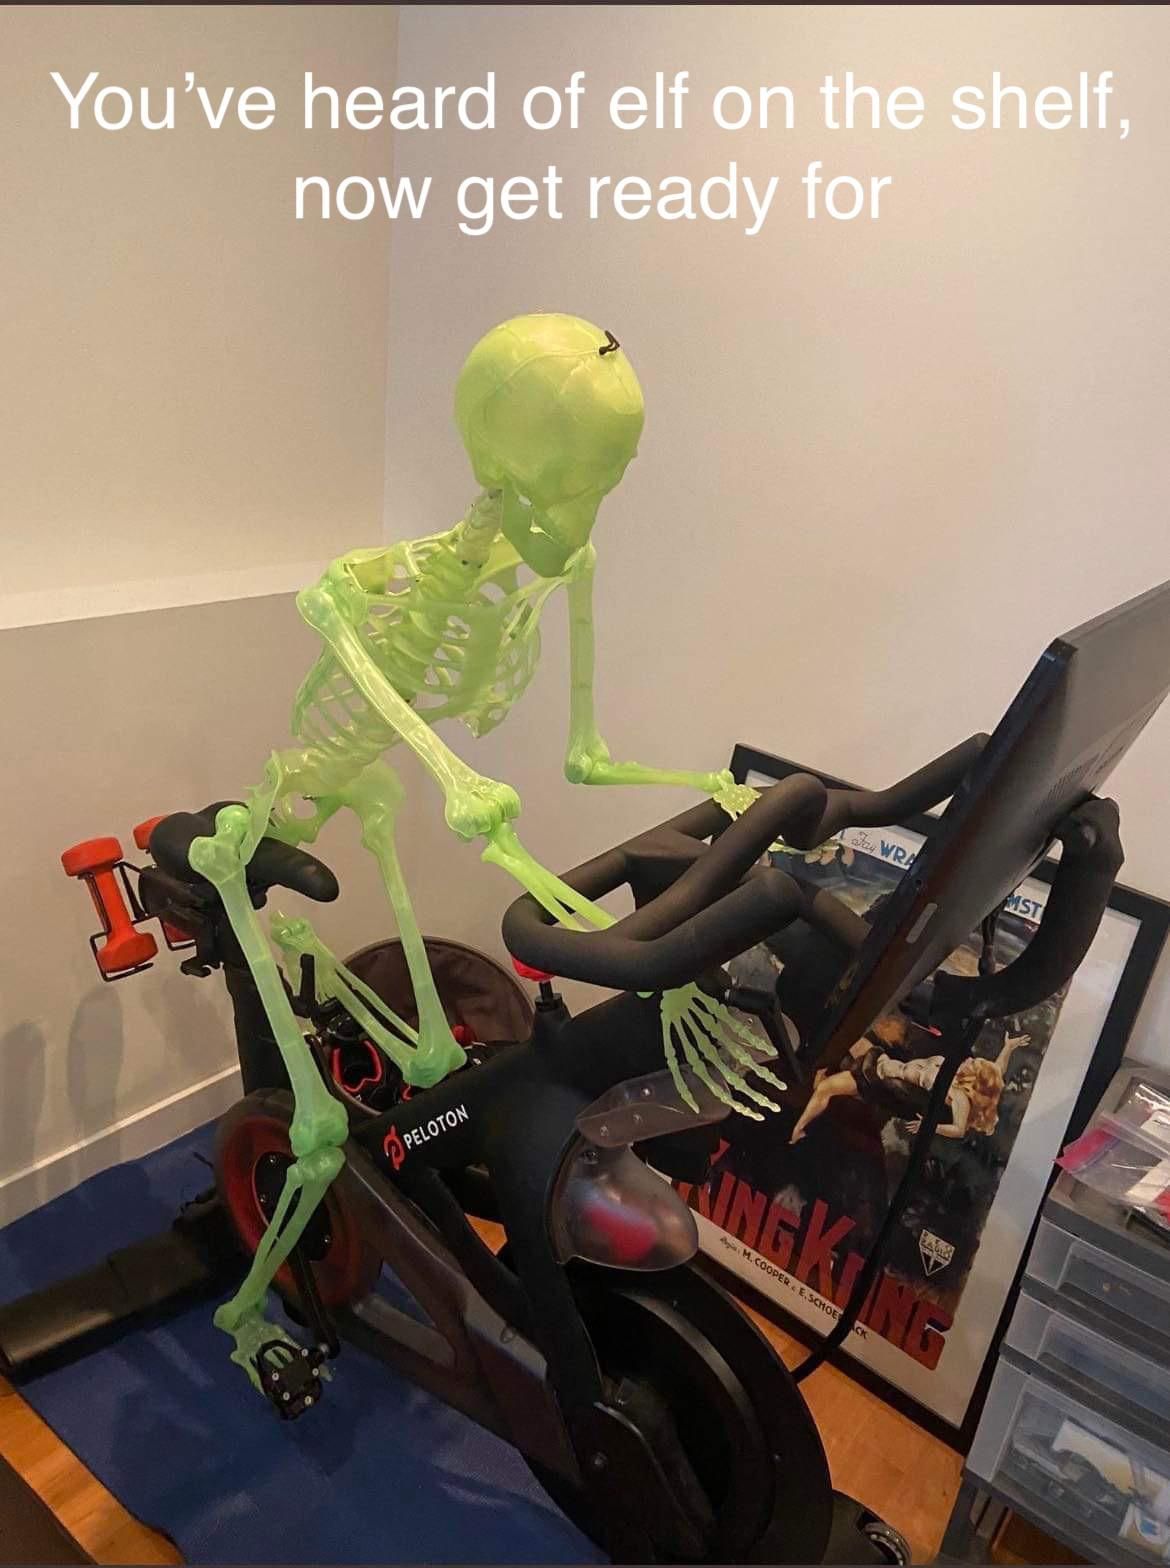 Time for some healthy spooks